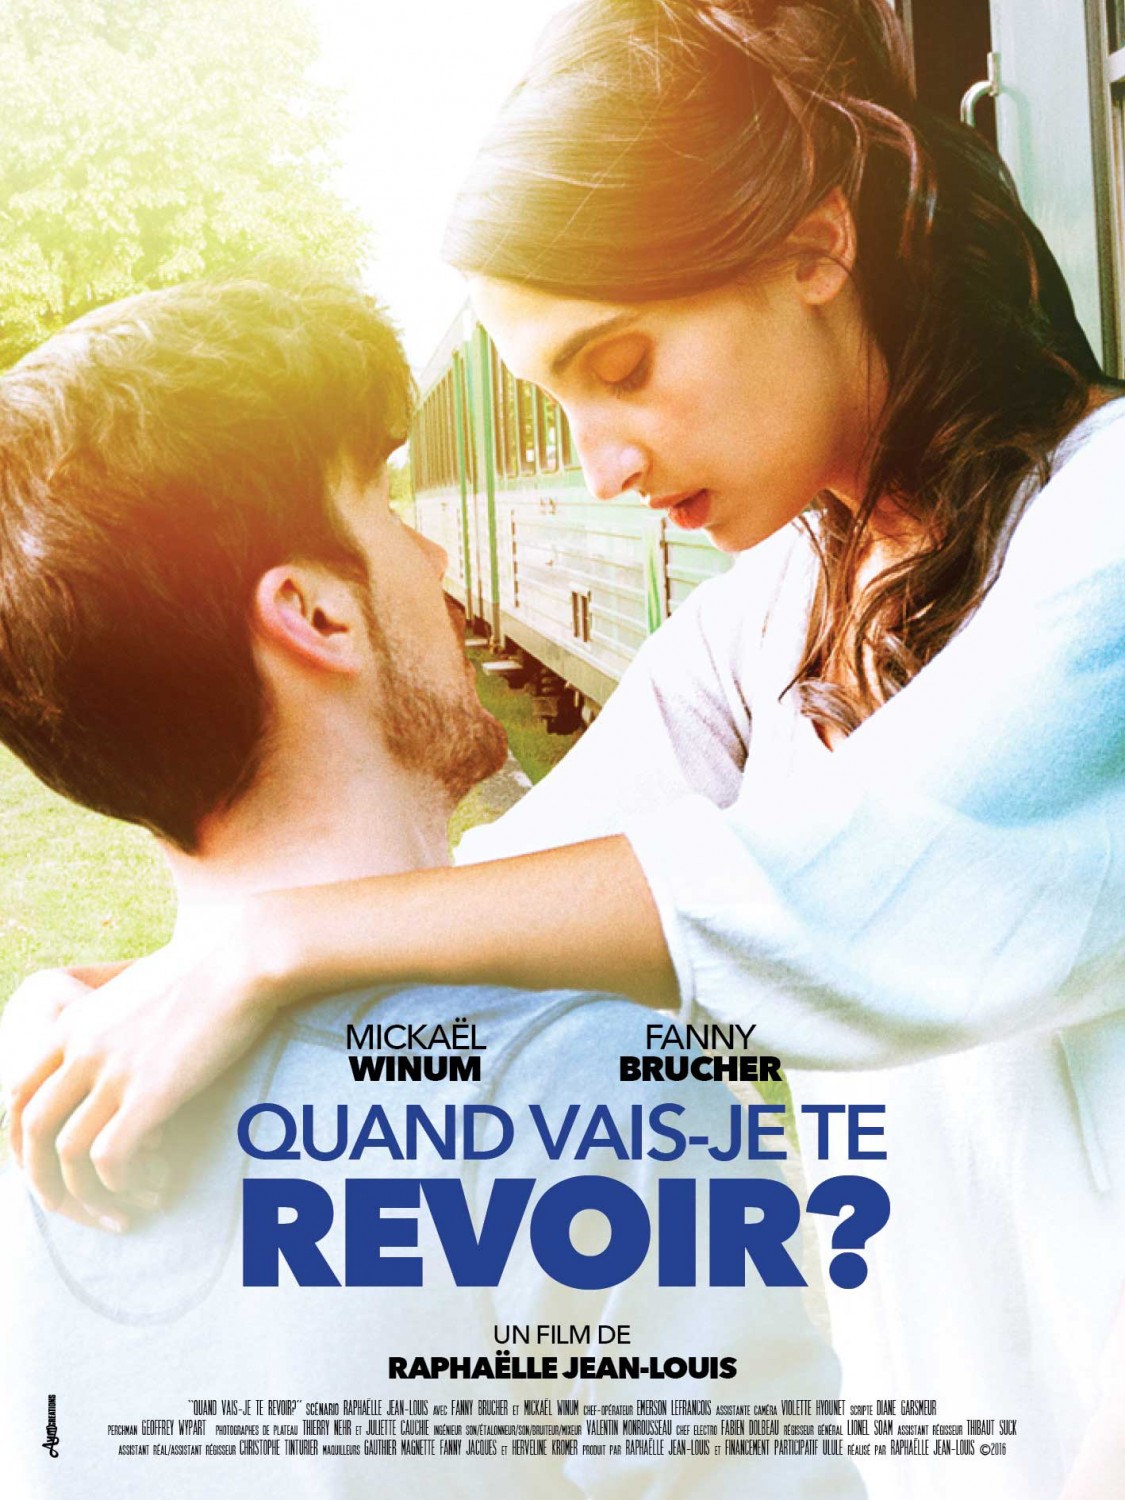 Extra Large Movie Poster Image for Quand vais-je te revoir?